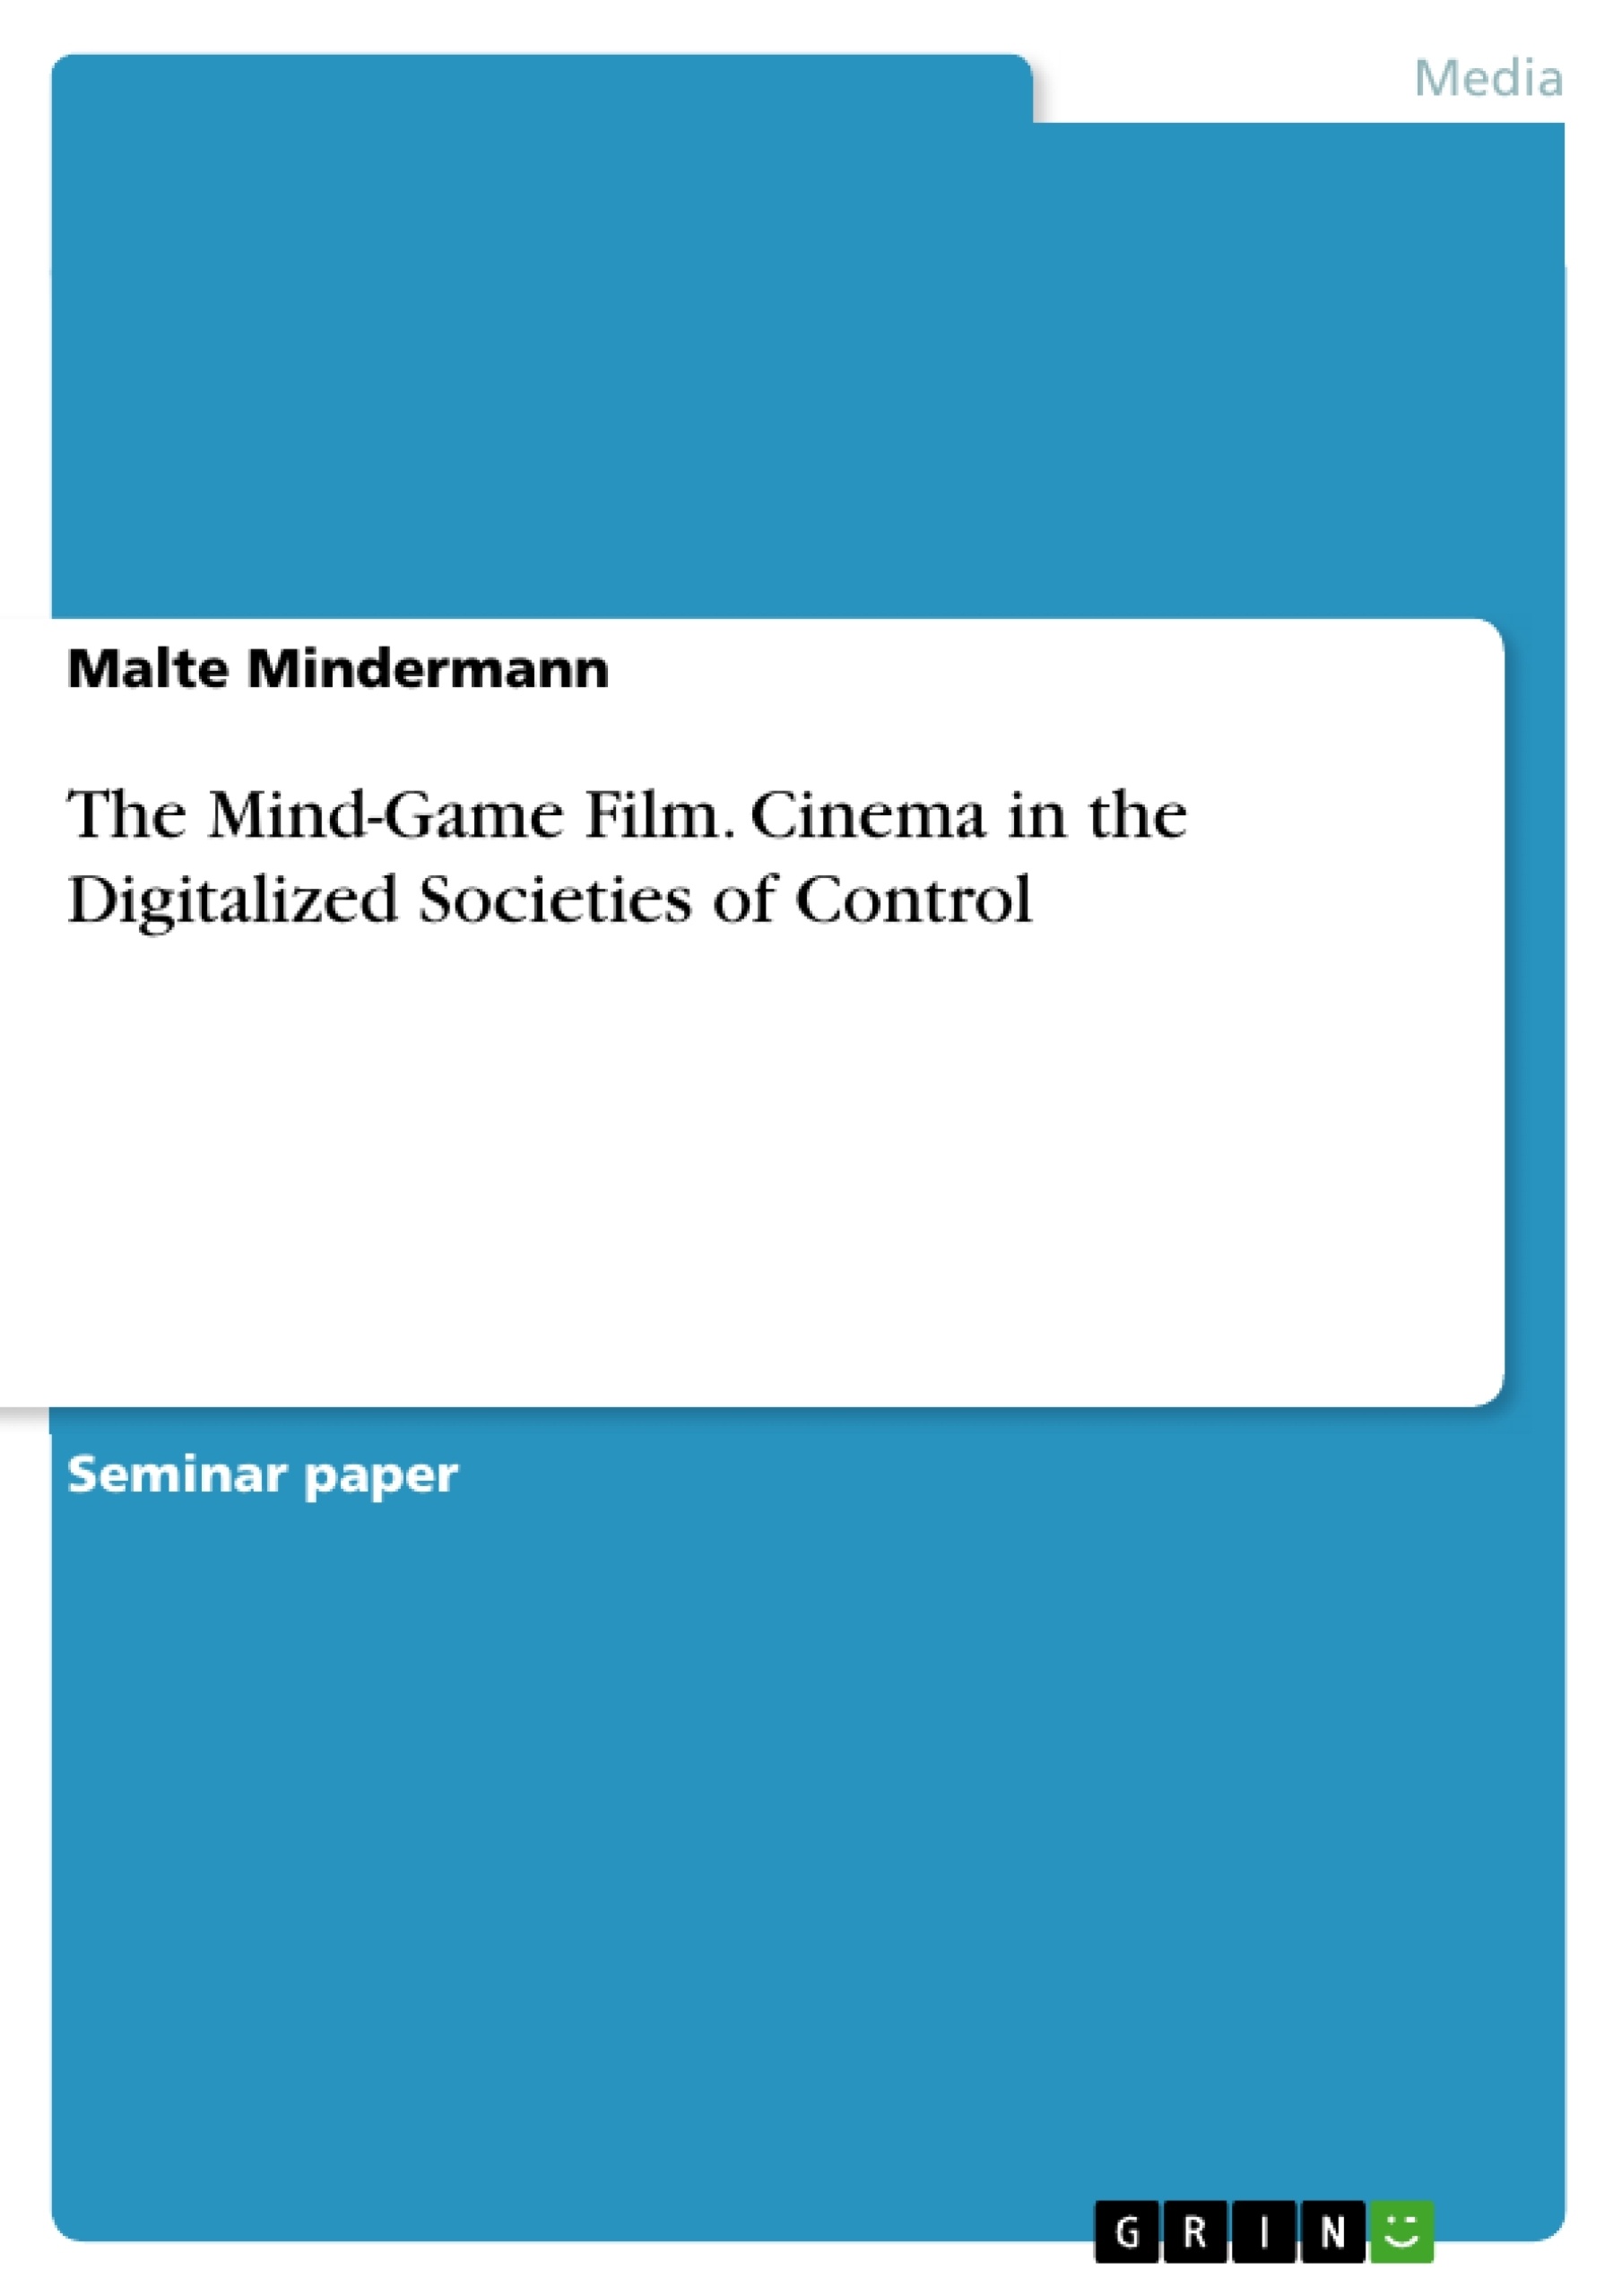 Title: The Mind-Game Film. Cinema in the Digitalized Societies of Control